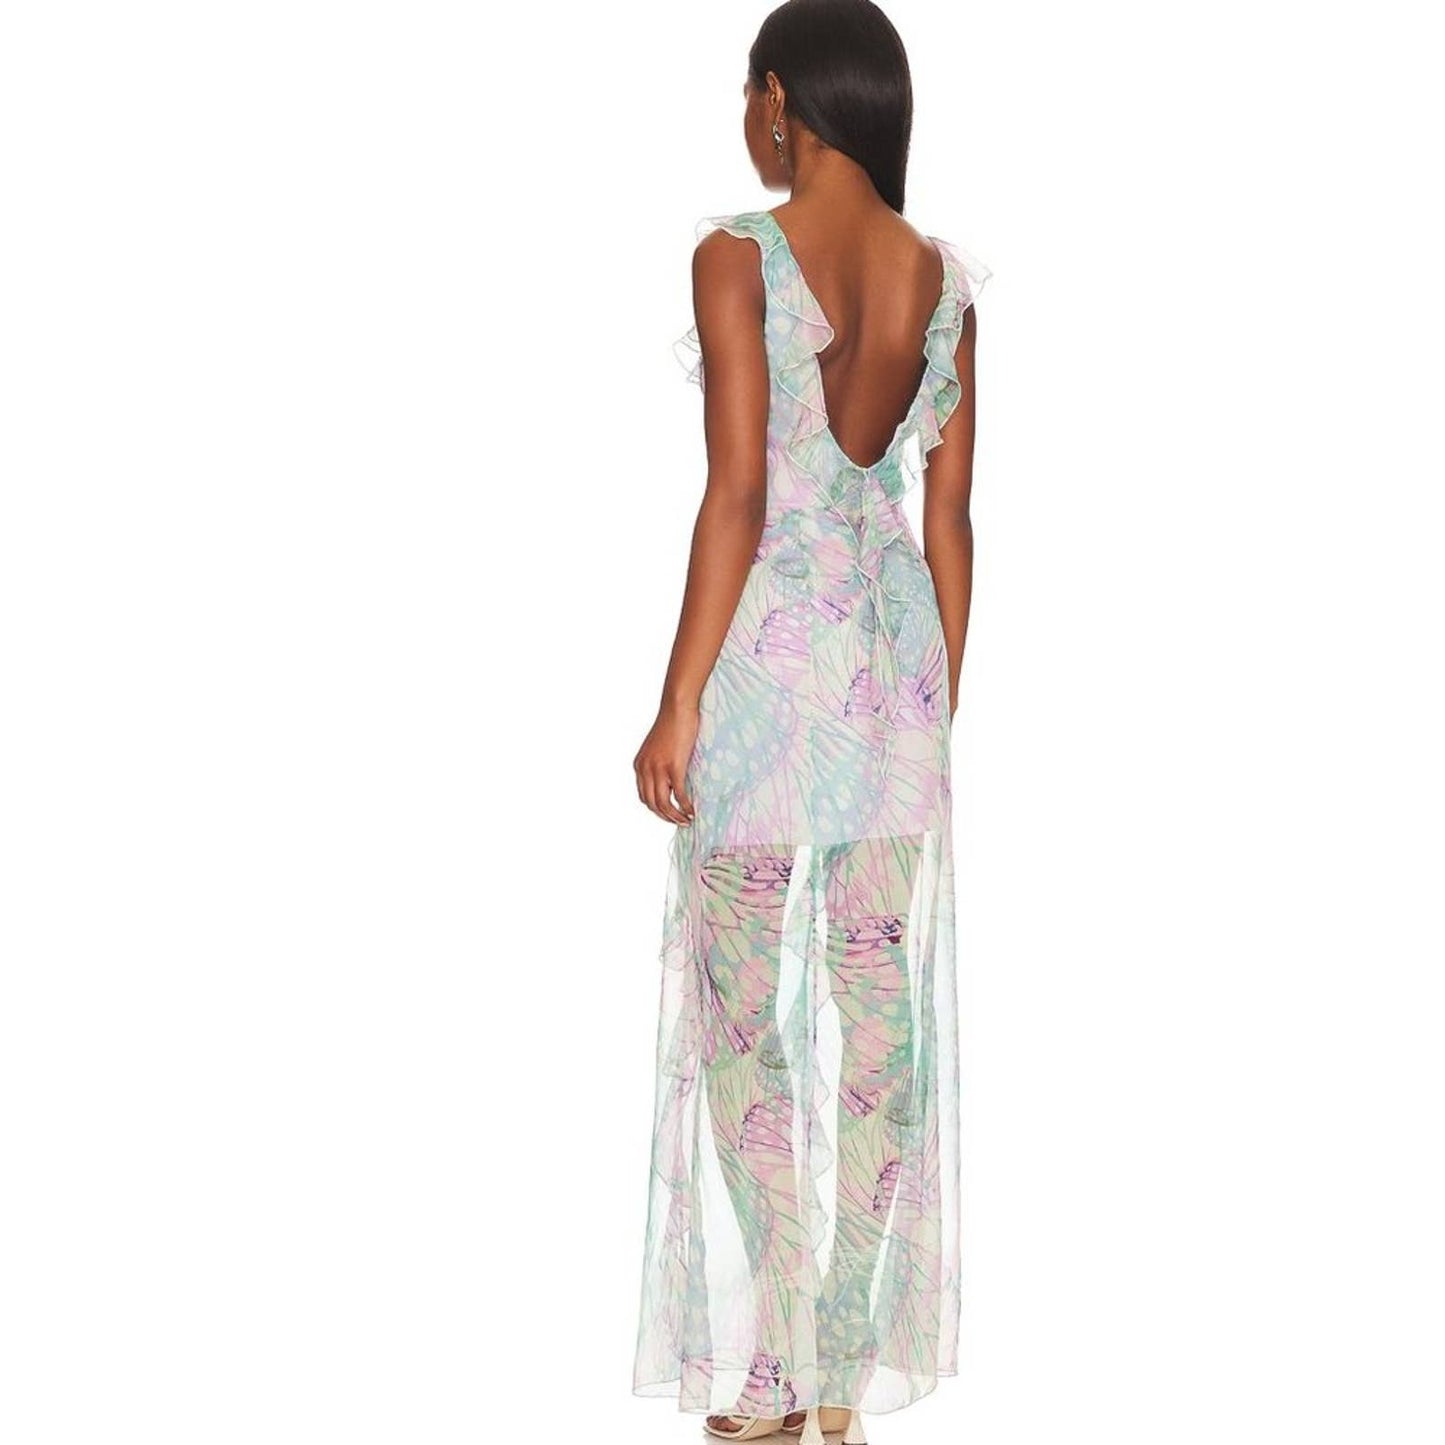 LPA Daniella Flutter Maxi Dress in Pink & Teal Abstract NWT Size Small